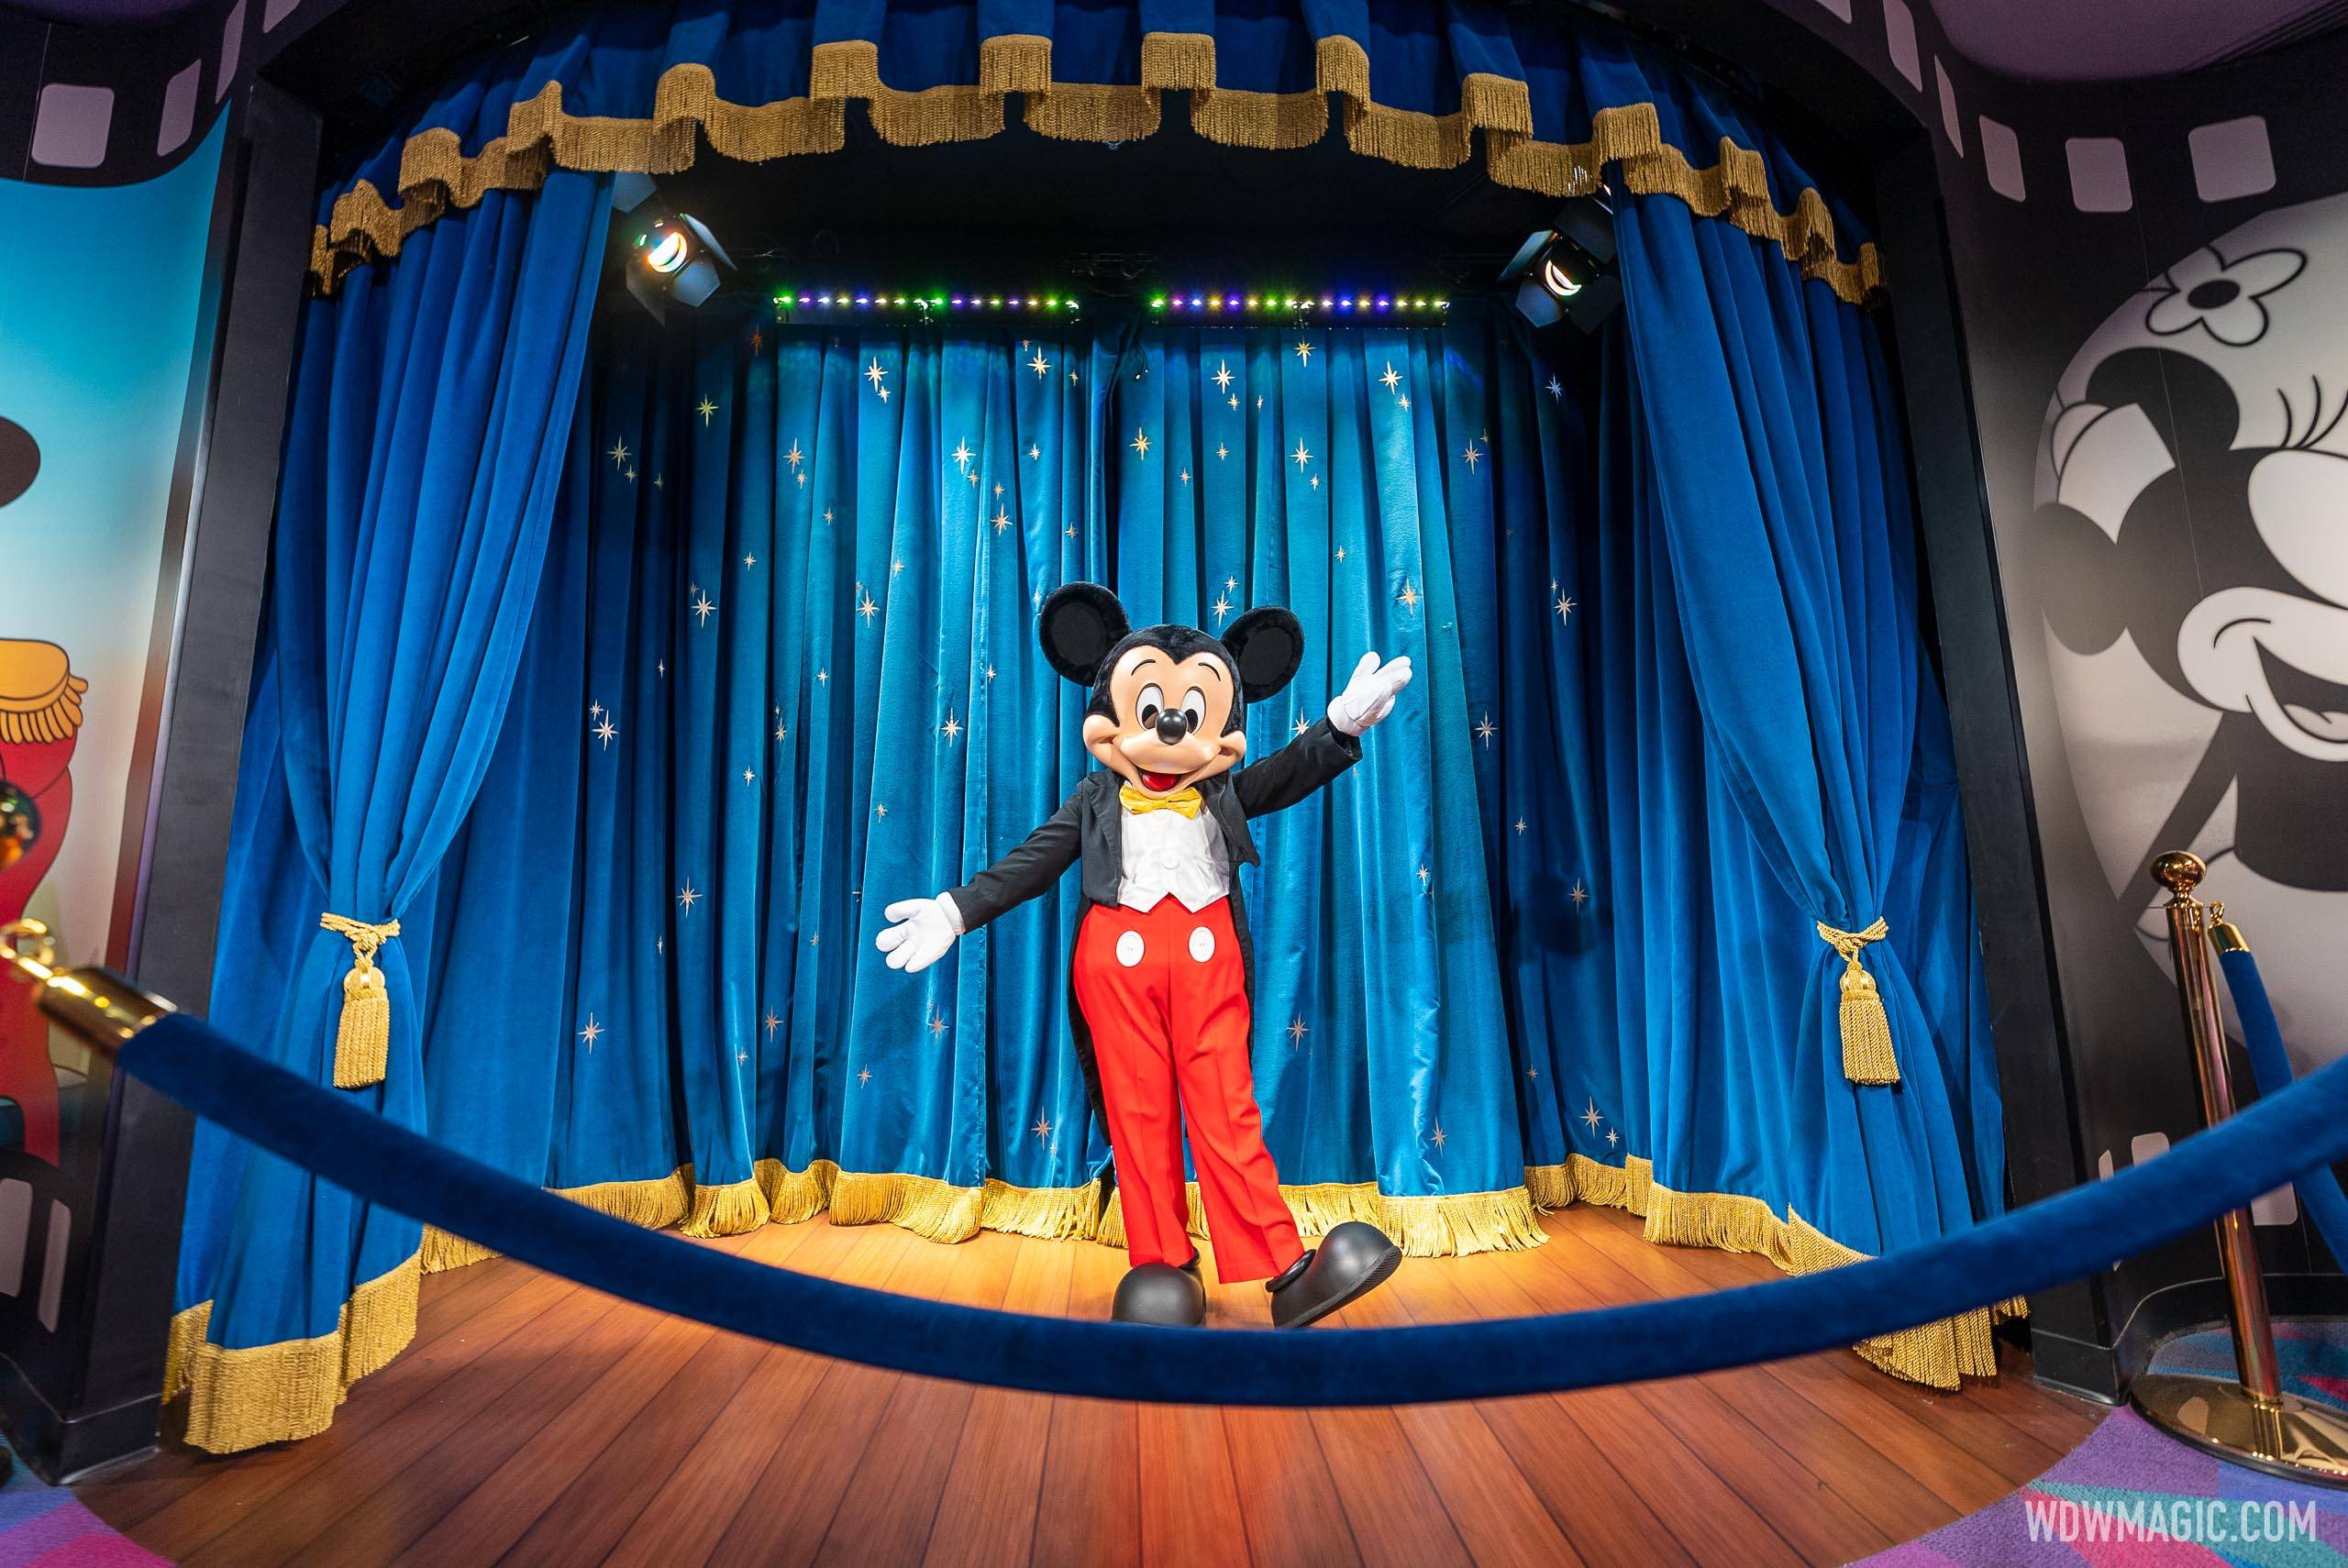 Distanced Mickey Mouse meet and greet at Imagination pavilion - February 2022